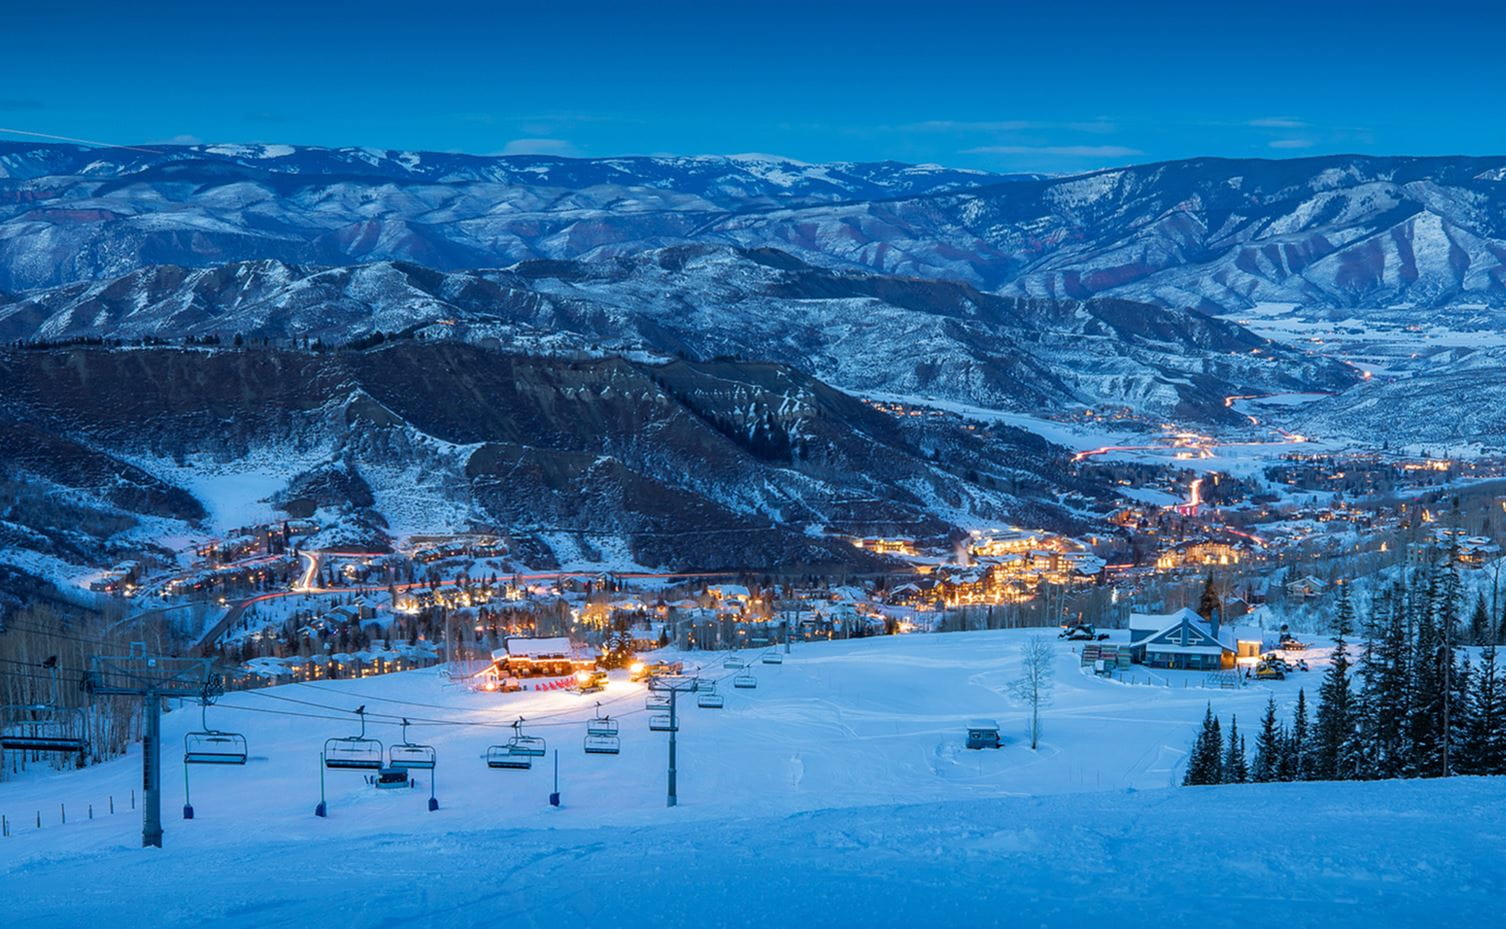 Travel Agents and working with Stay Aspen Snowmass